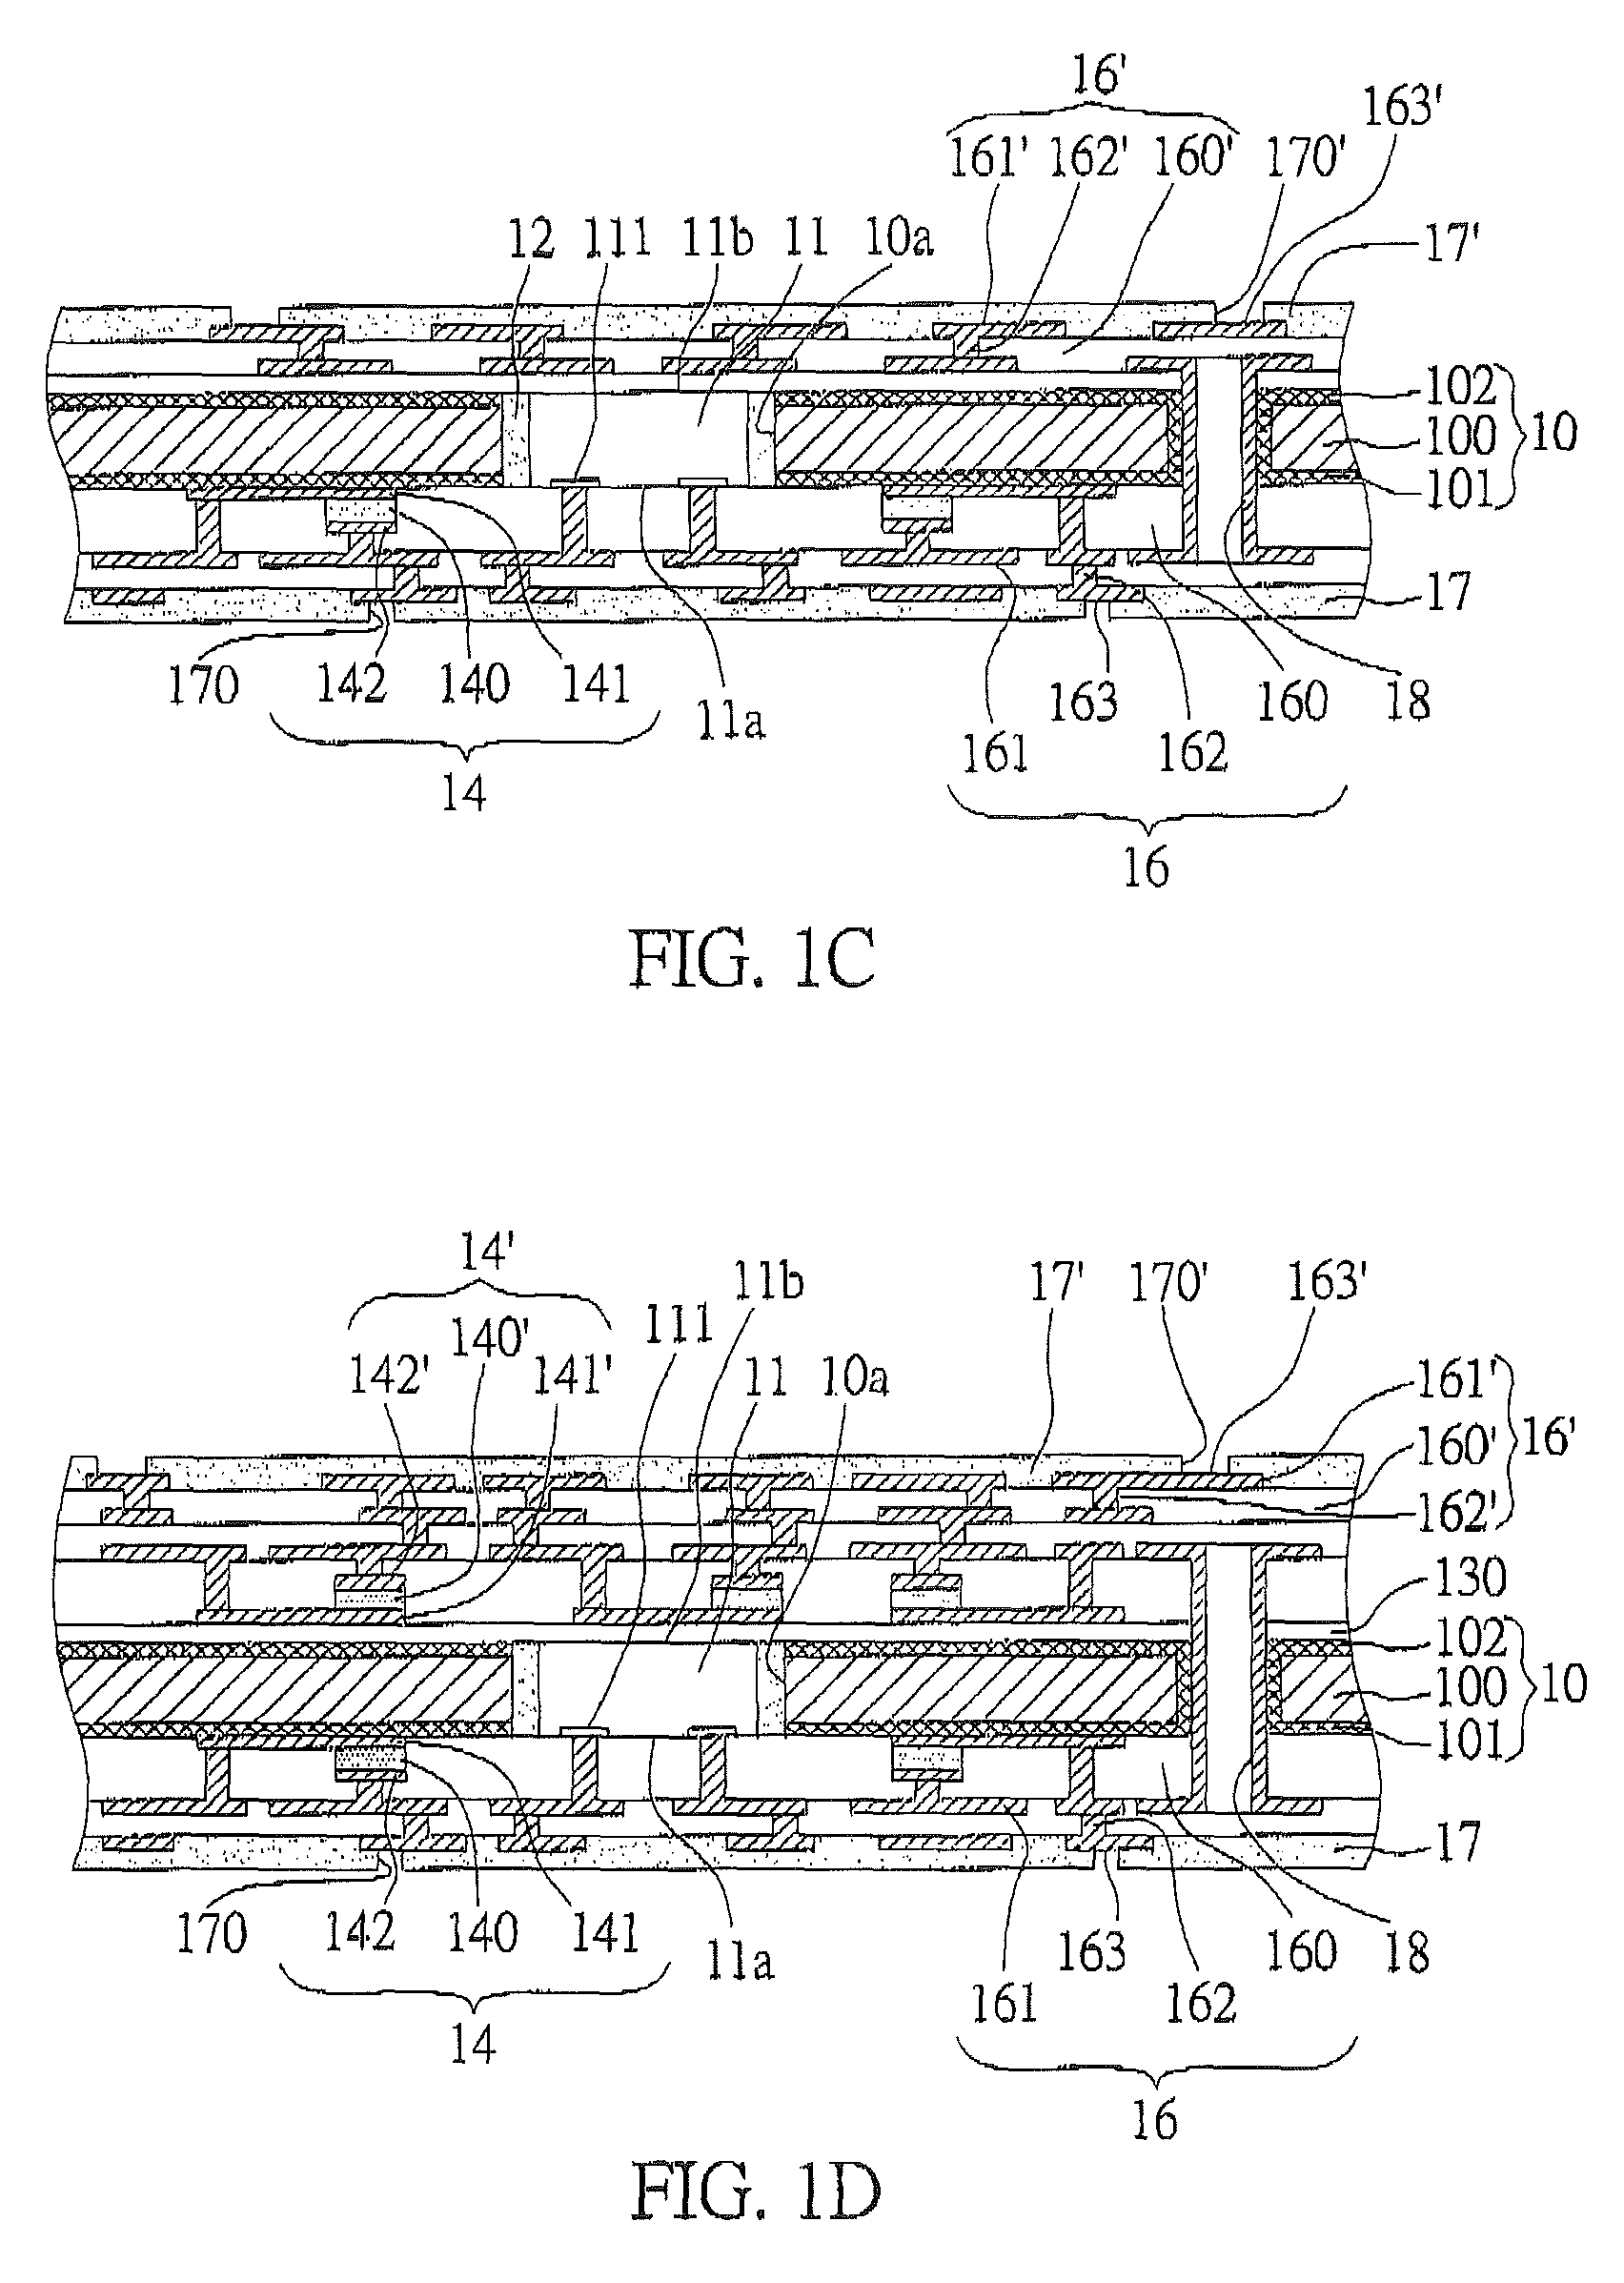 Circuit board structure having electronic components integrated therein